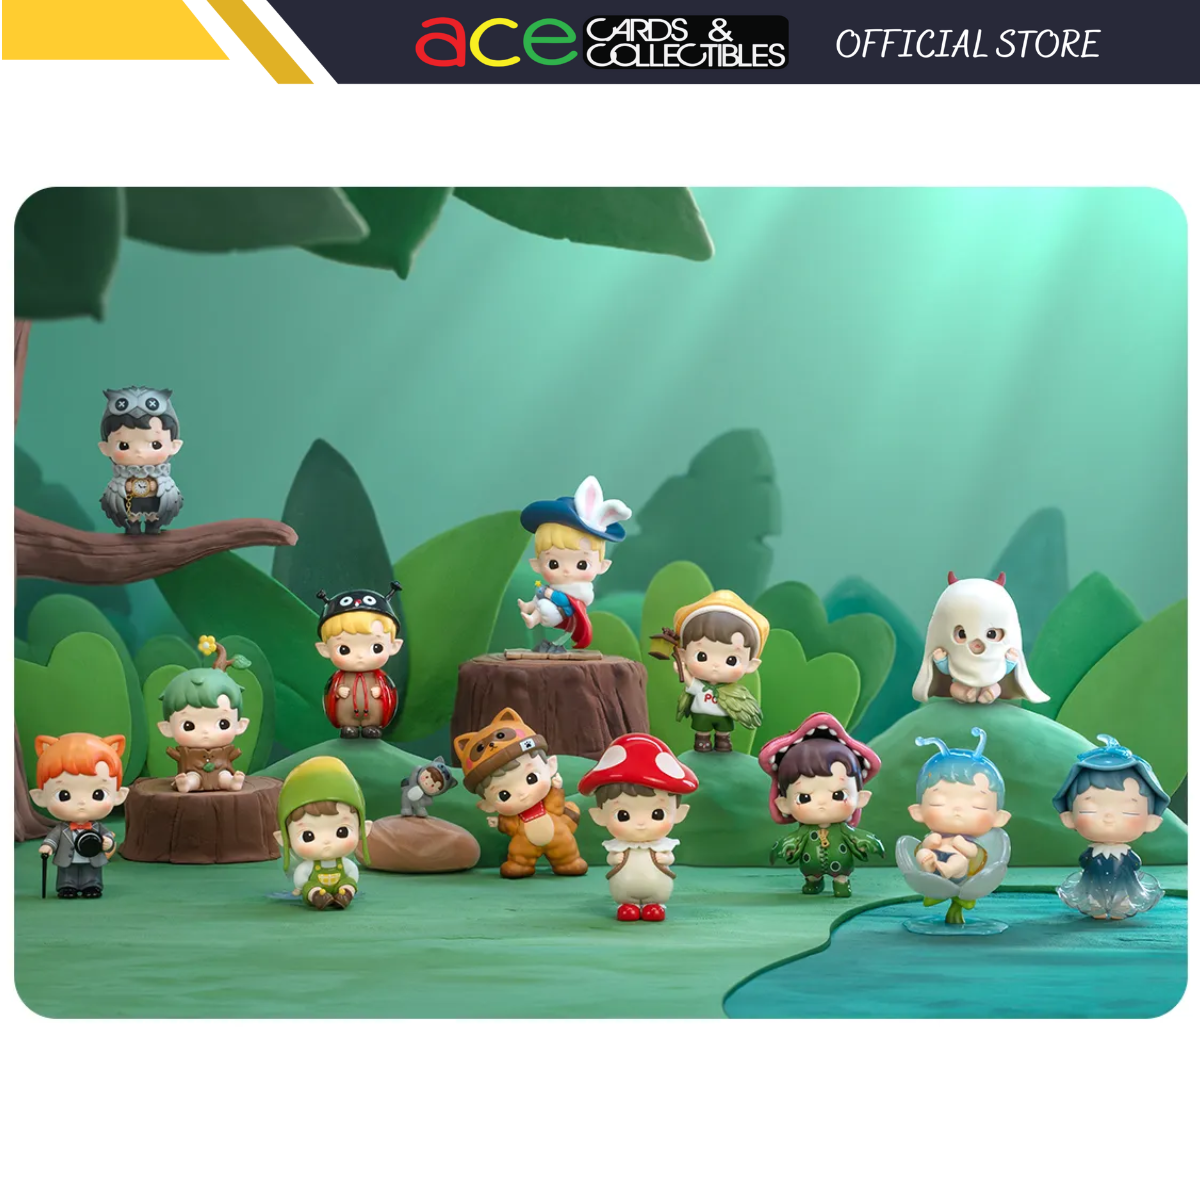 POP MART HACIPUPU The Adventures In The Woods Series-Single Box (Random)-Pop Mart-Ace Cards &amp; Collectibles